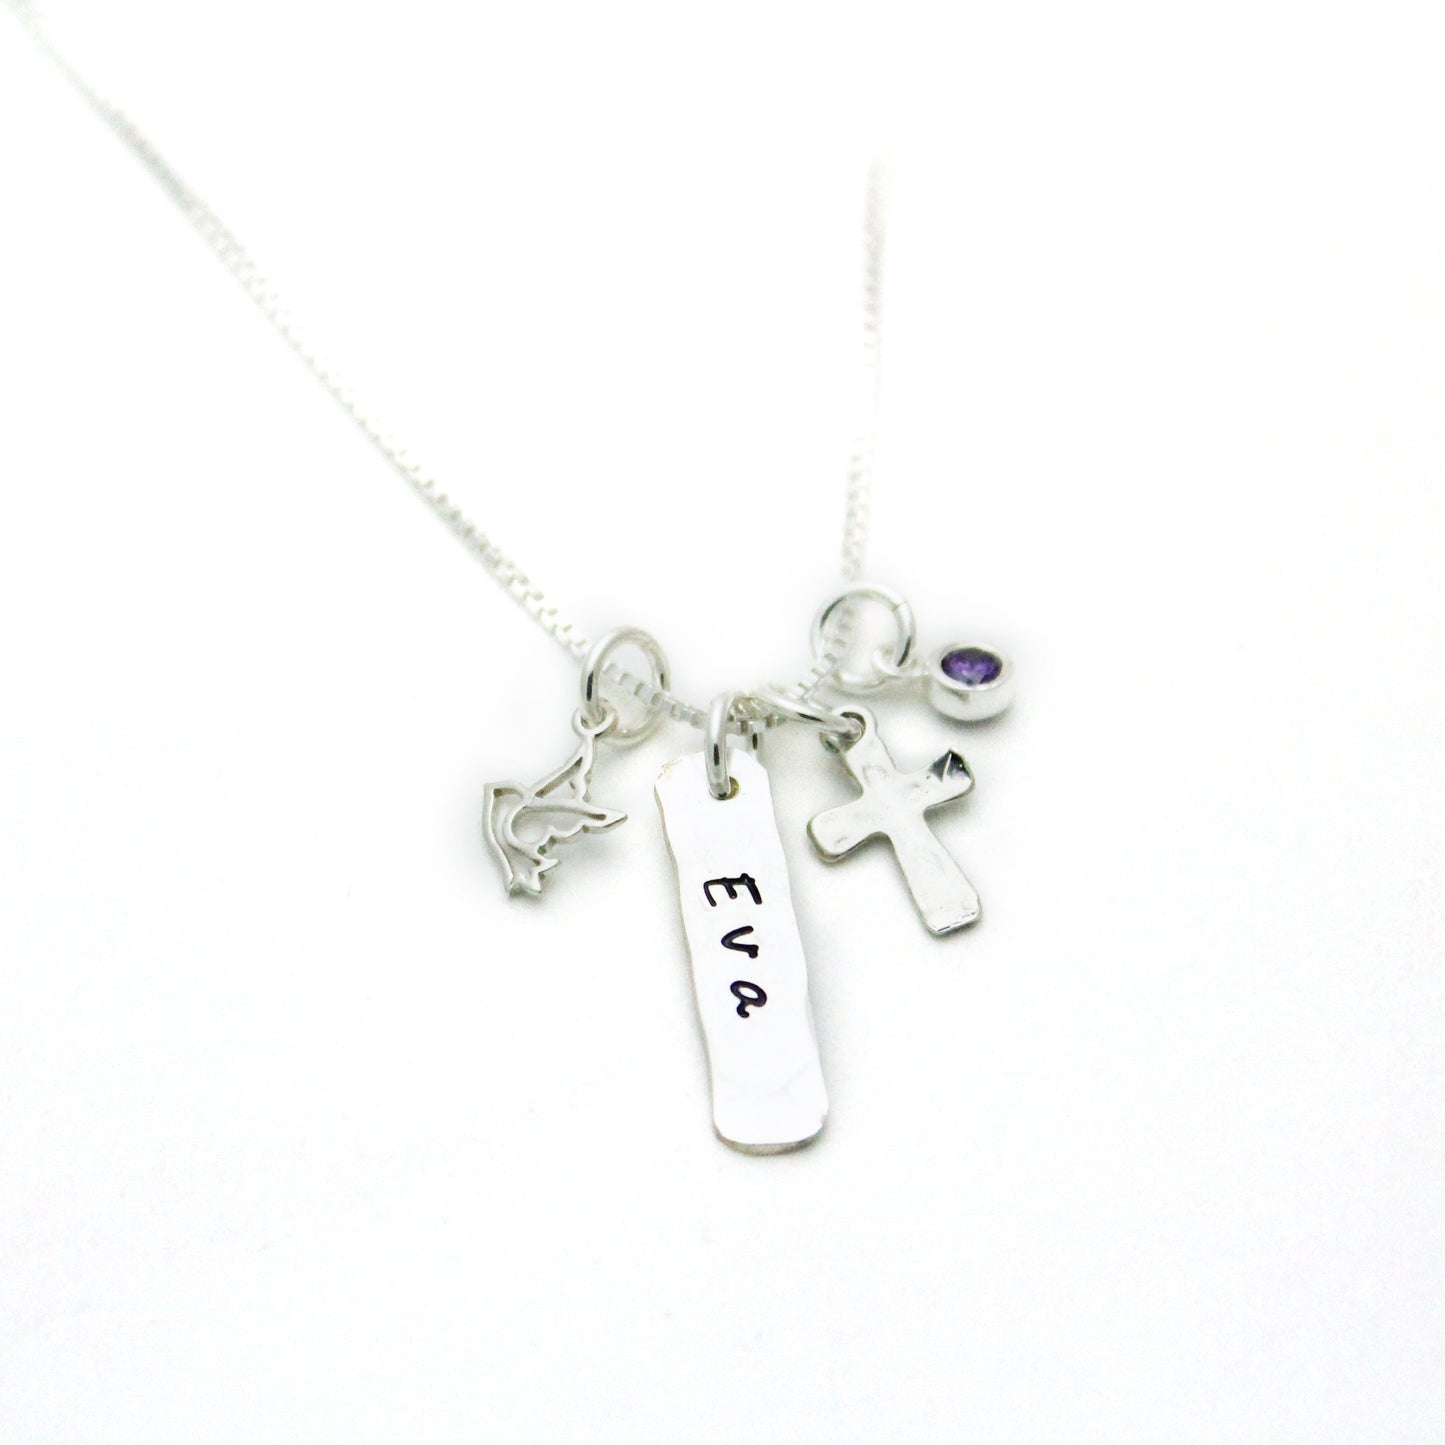 Dove and Cross Tag Necklace with Birthstone or Pearl for Confirmation Personalized Sterling Silver Hand Stamped Jewelry